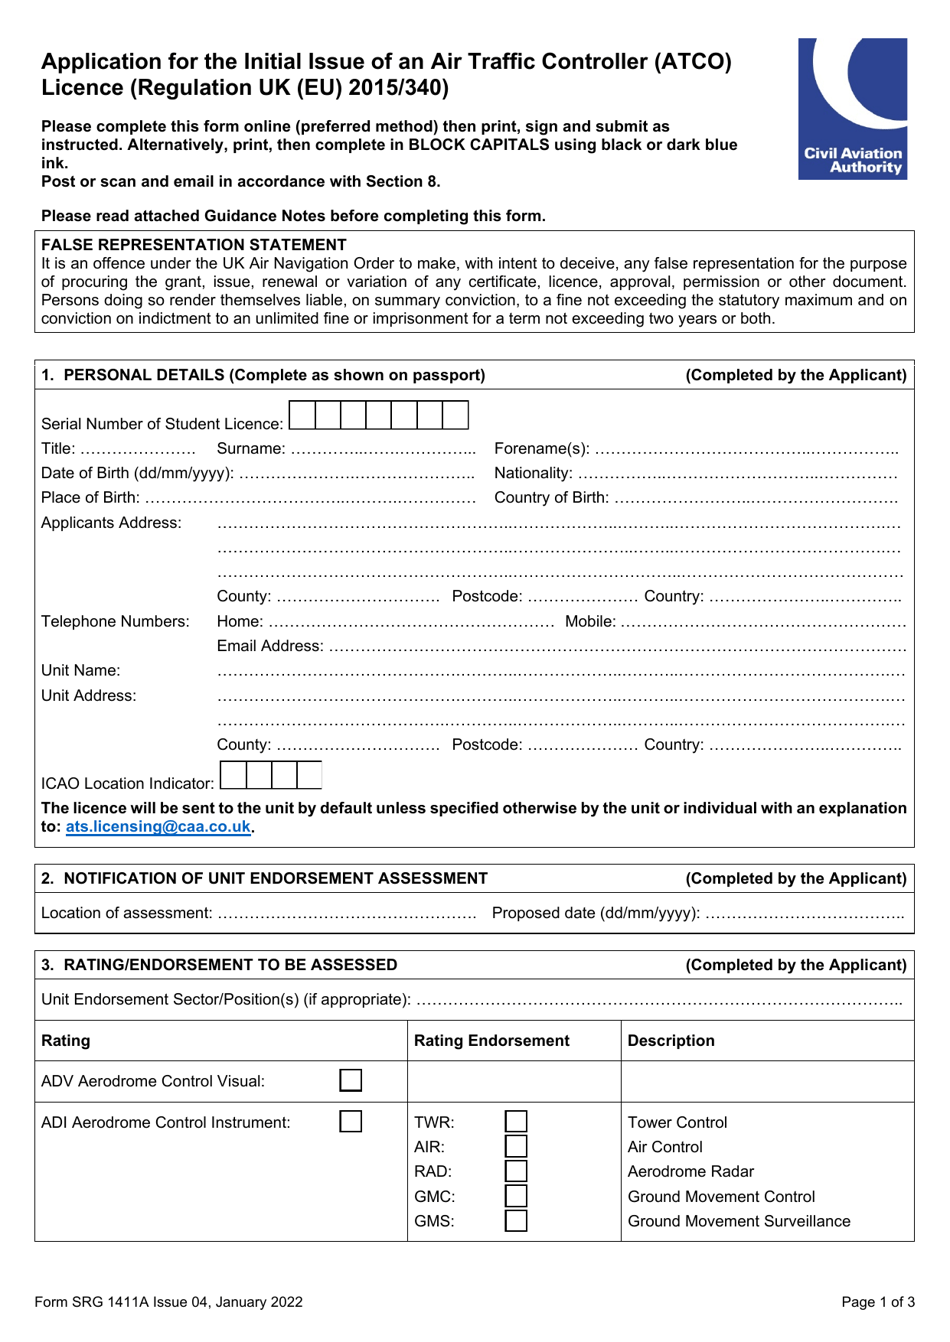 Form SRG1411A Application for the Initial Issue of an Air Traffic Controller (Atco) Licence (Regulation UK (Eu) 2015/340) - United Kingdom, Page 1